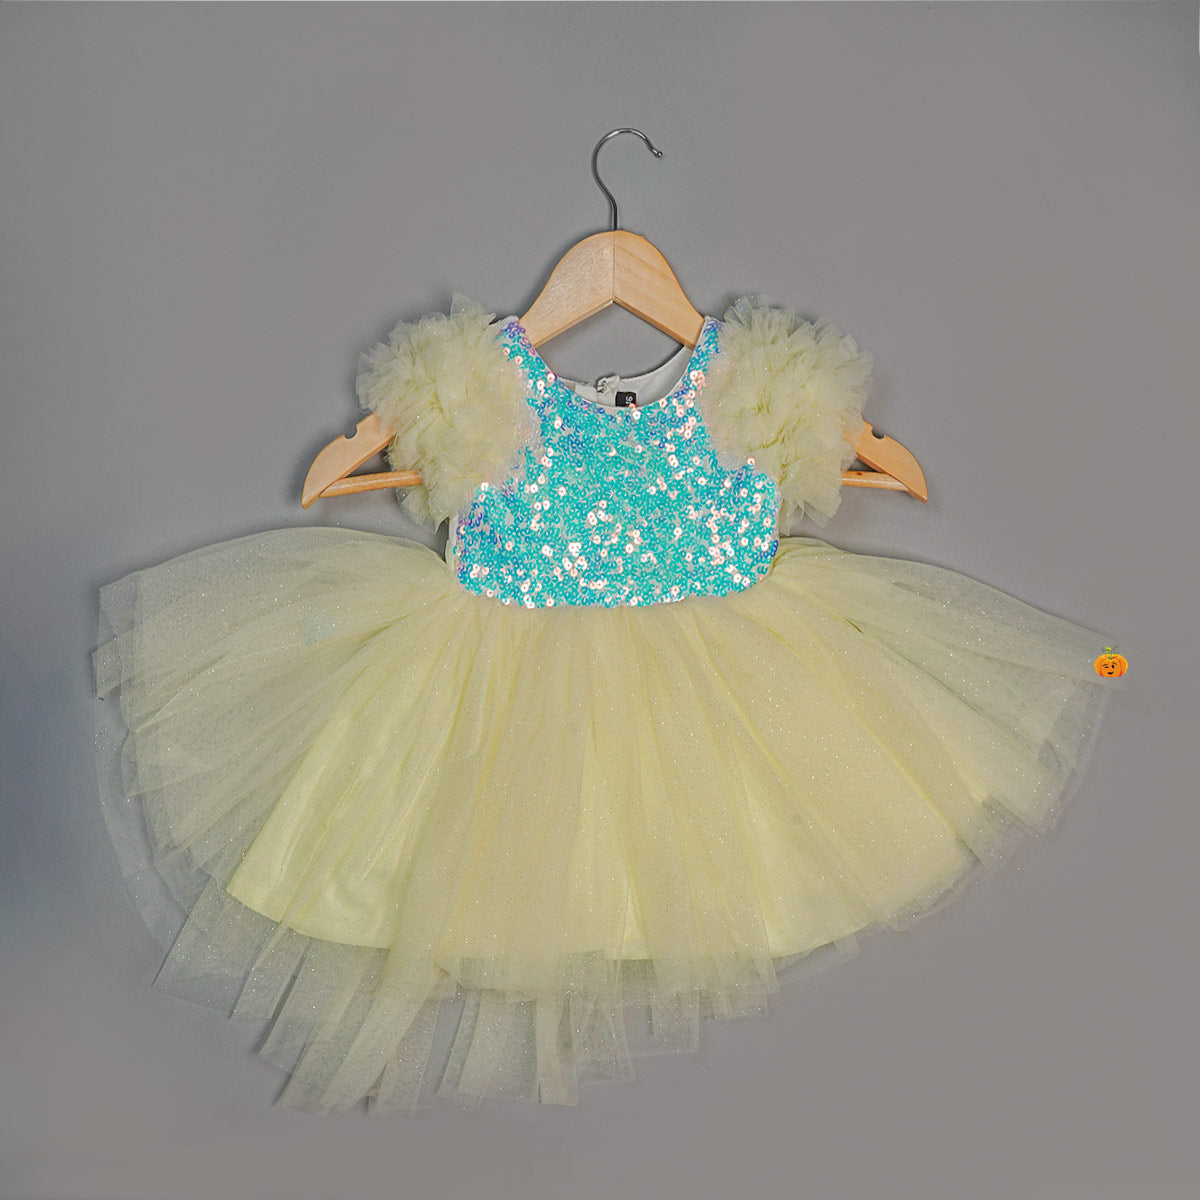 What is New Design Clothes Girl Baby Sequin Fluffy Princess Dress